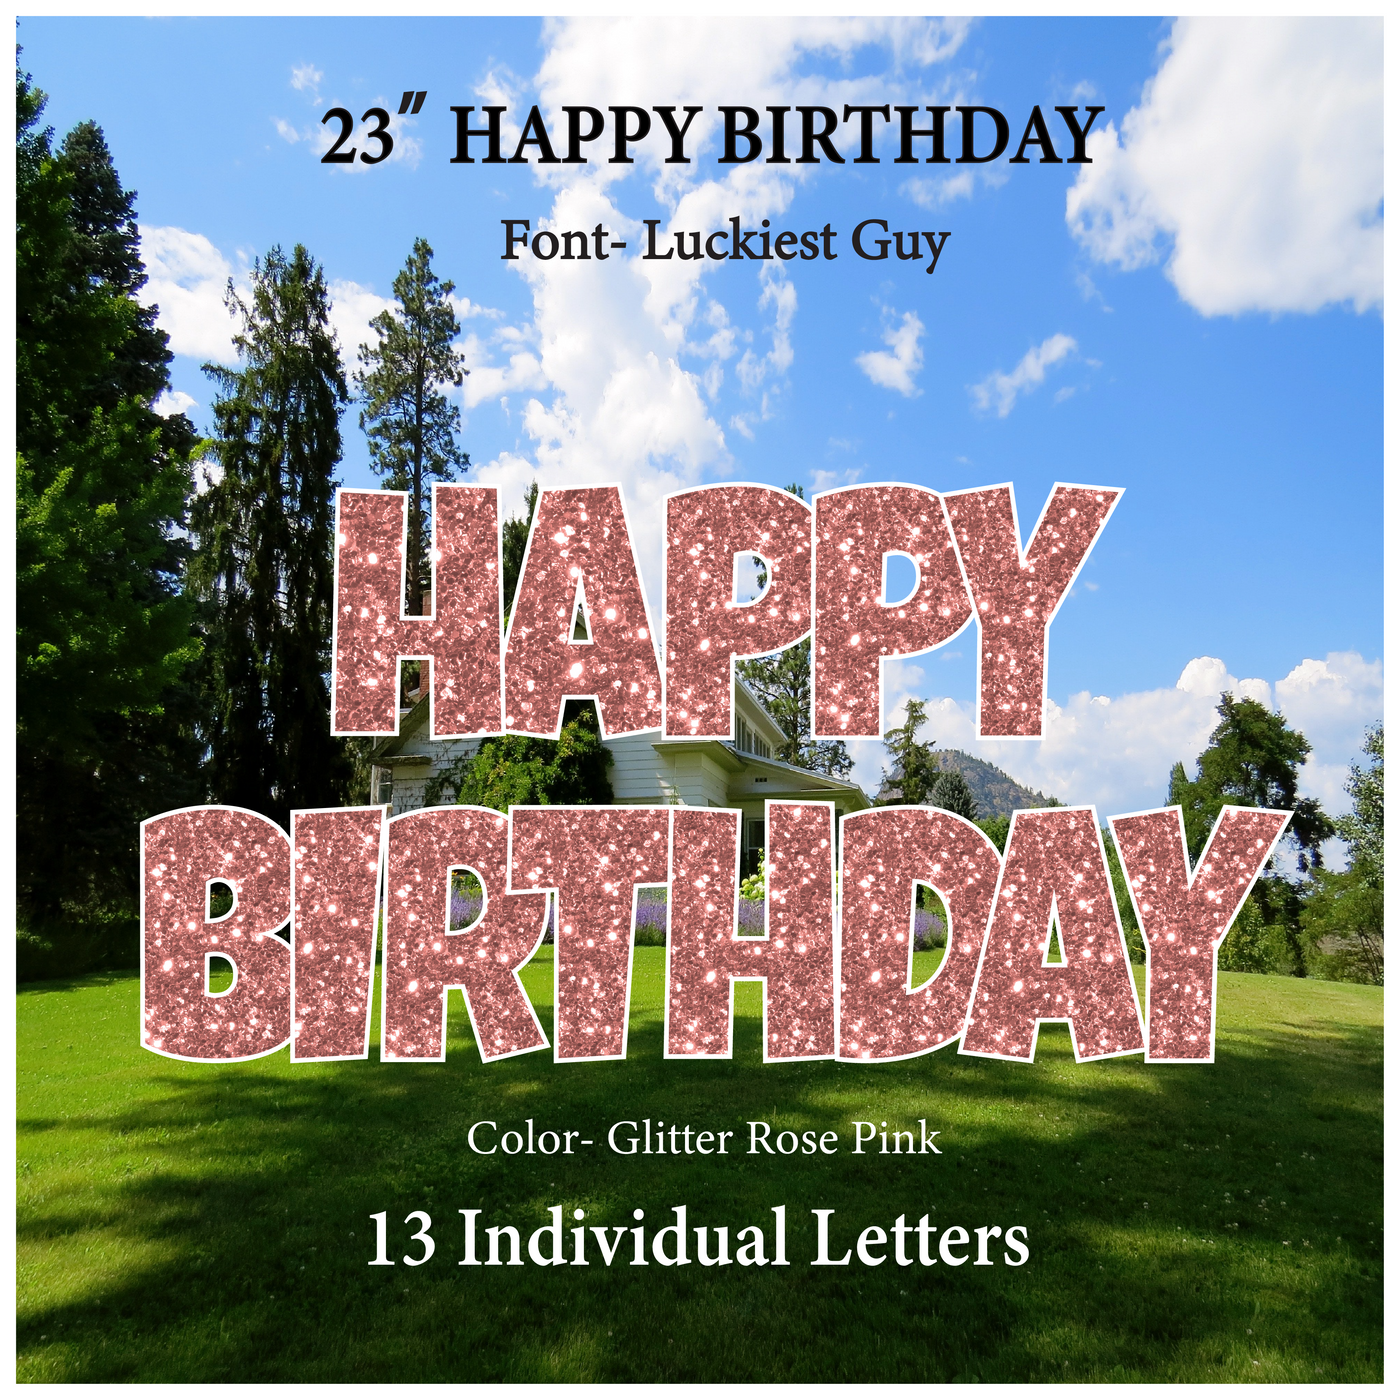 Glitter Rose Pink 23''HAPPY BIRTHDAY Including 13 Individual Letters